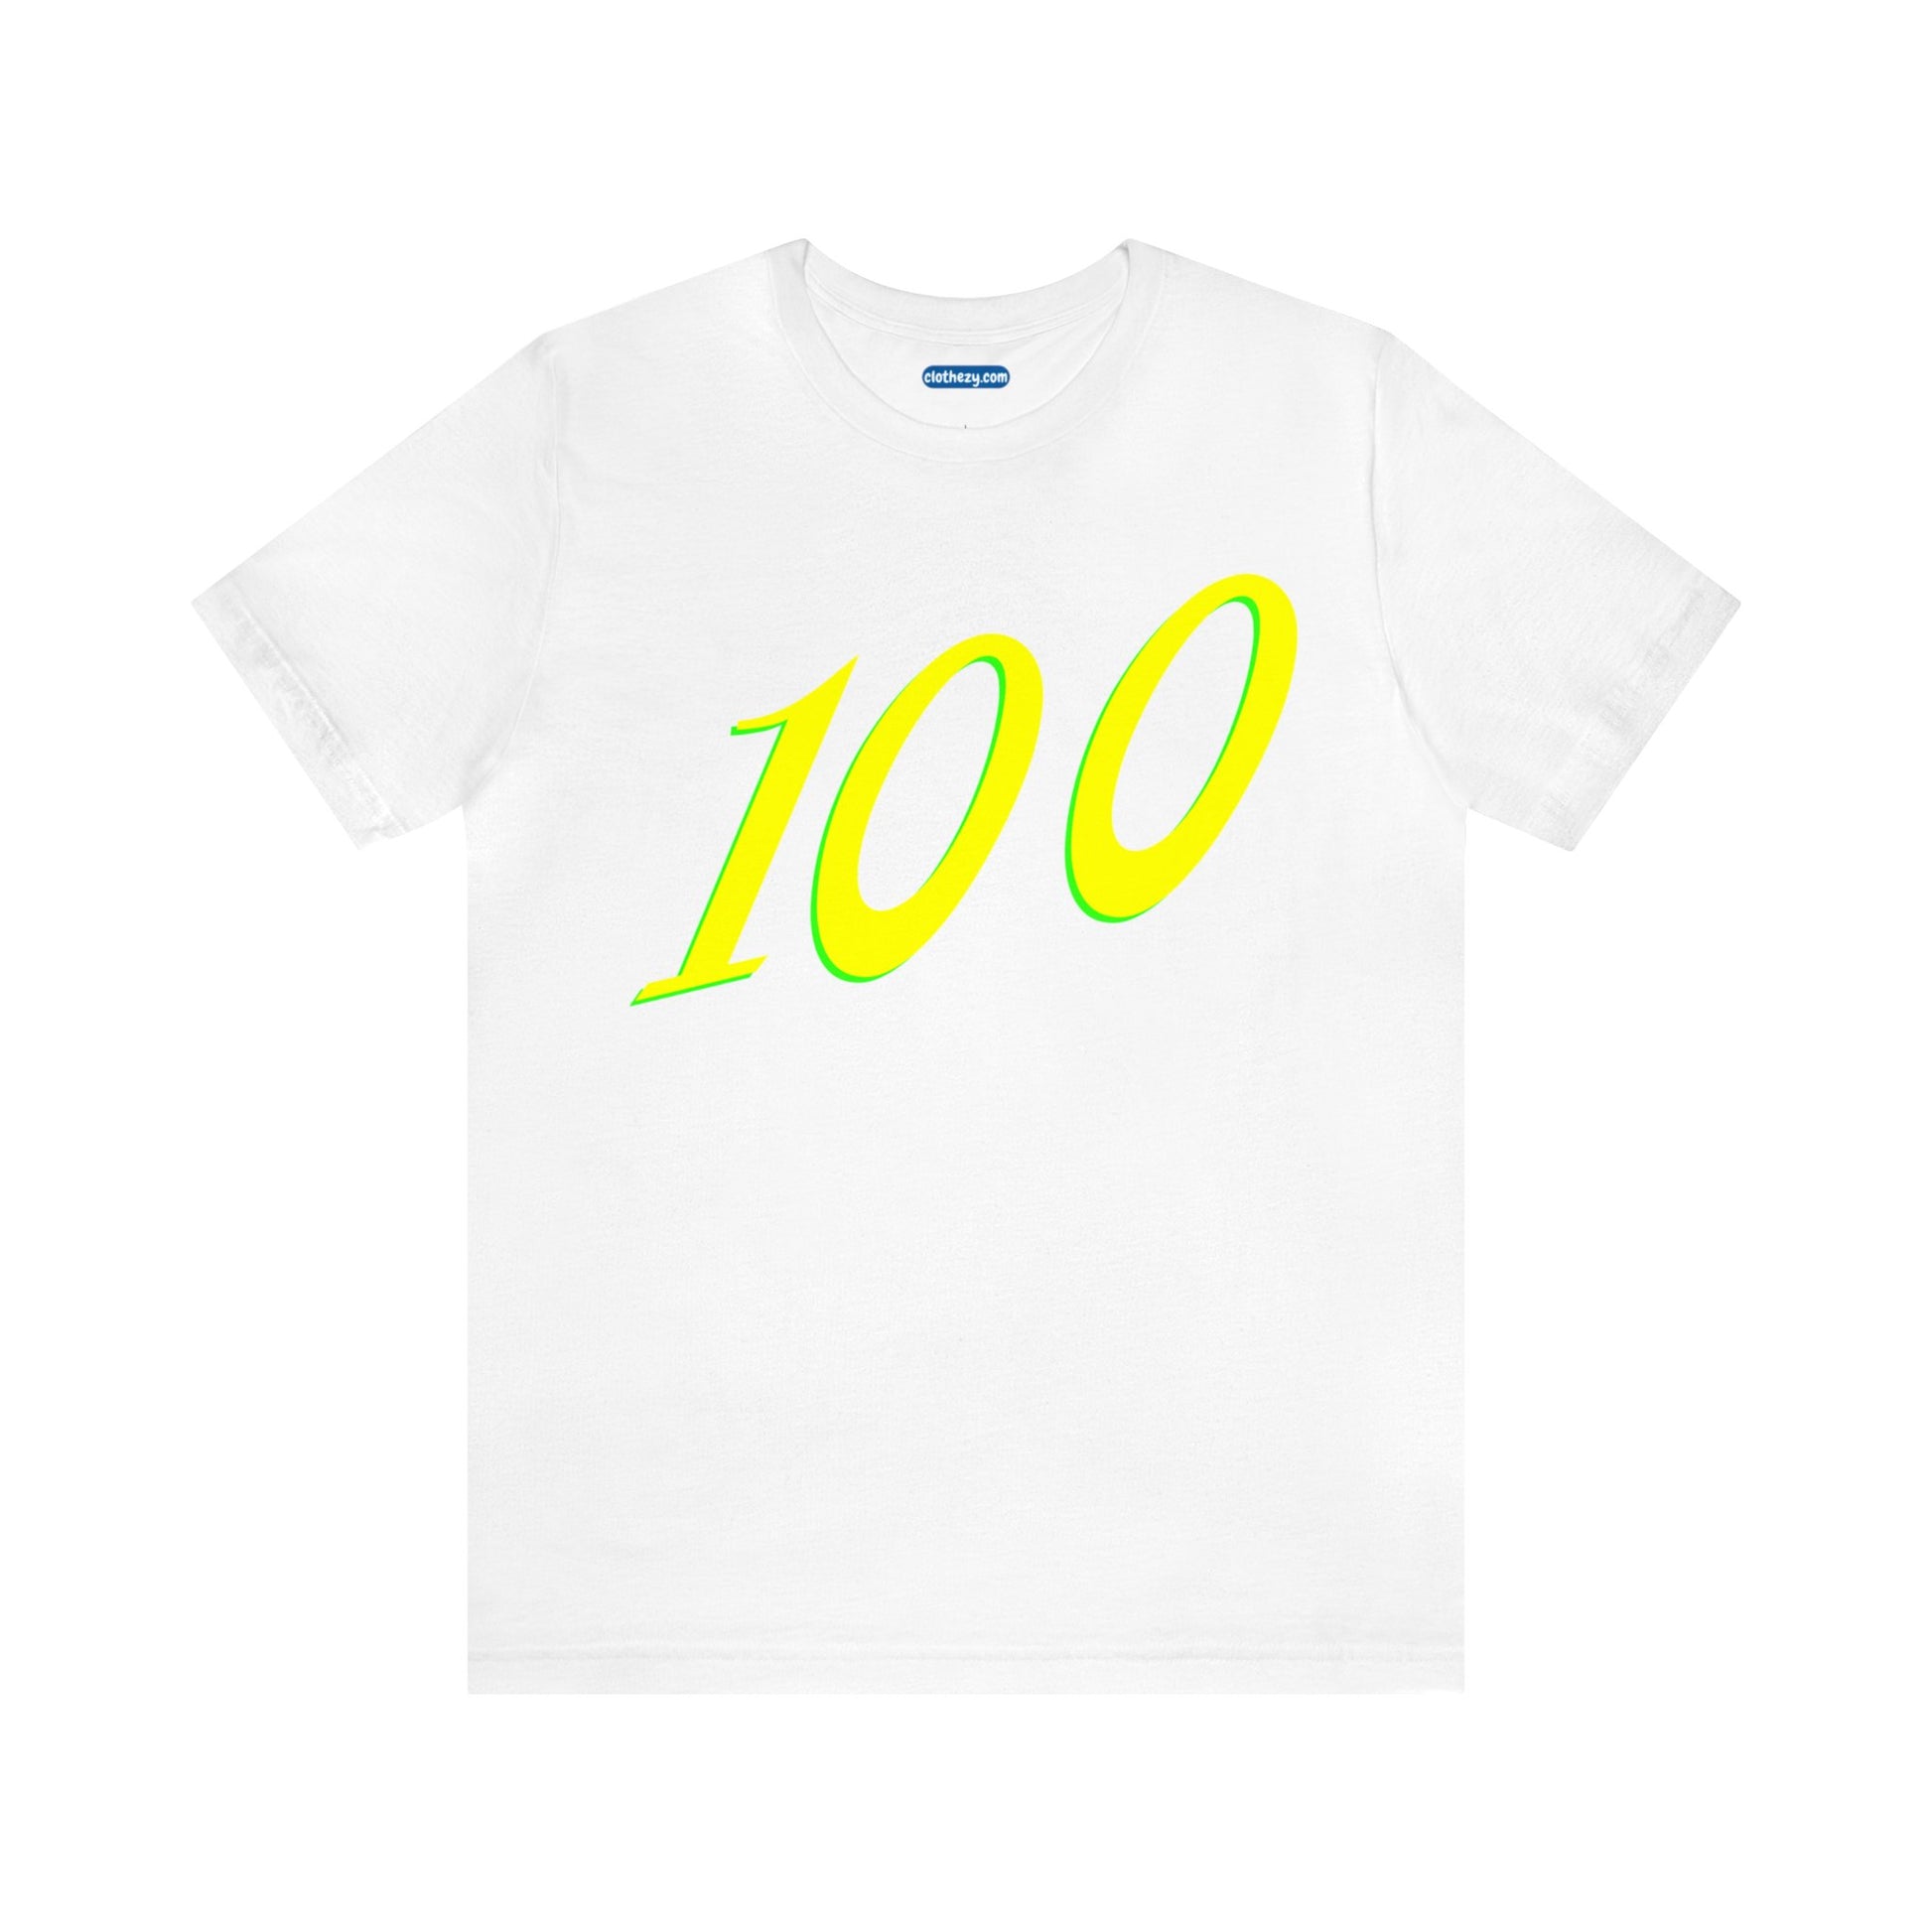 Number 100 Design - Soft Cotton Tee for birthdays and celebrations, Gift for friends and family, Multiple Options by clothezy.com in White Size Small - Buy Now